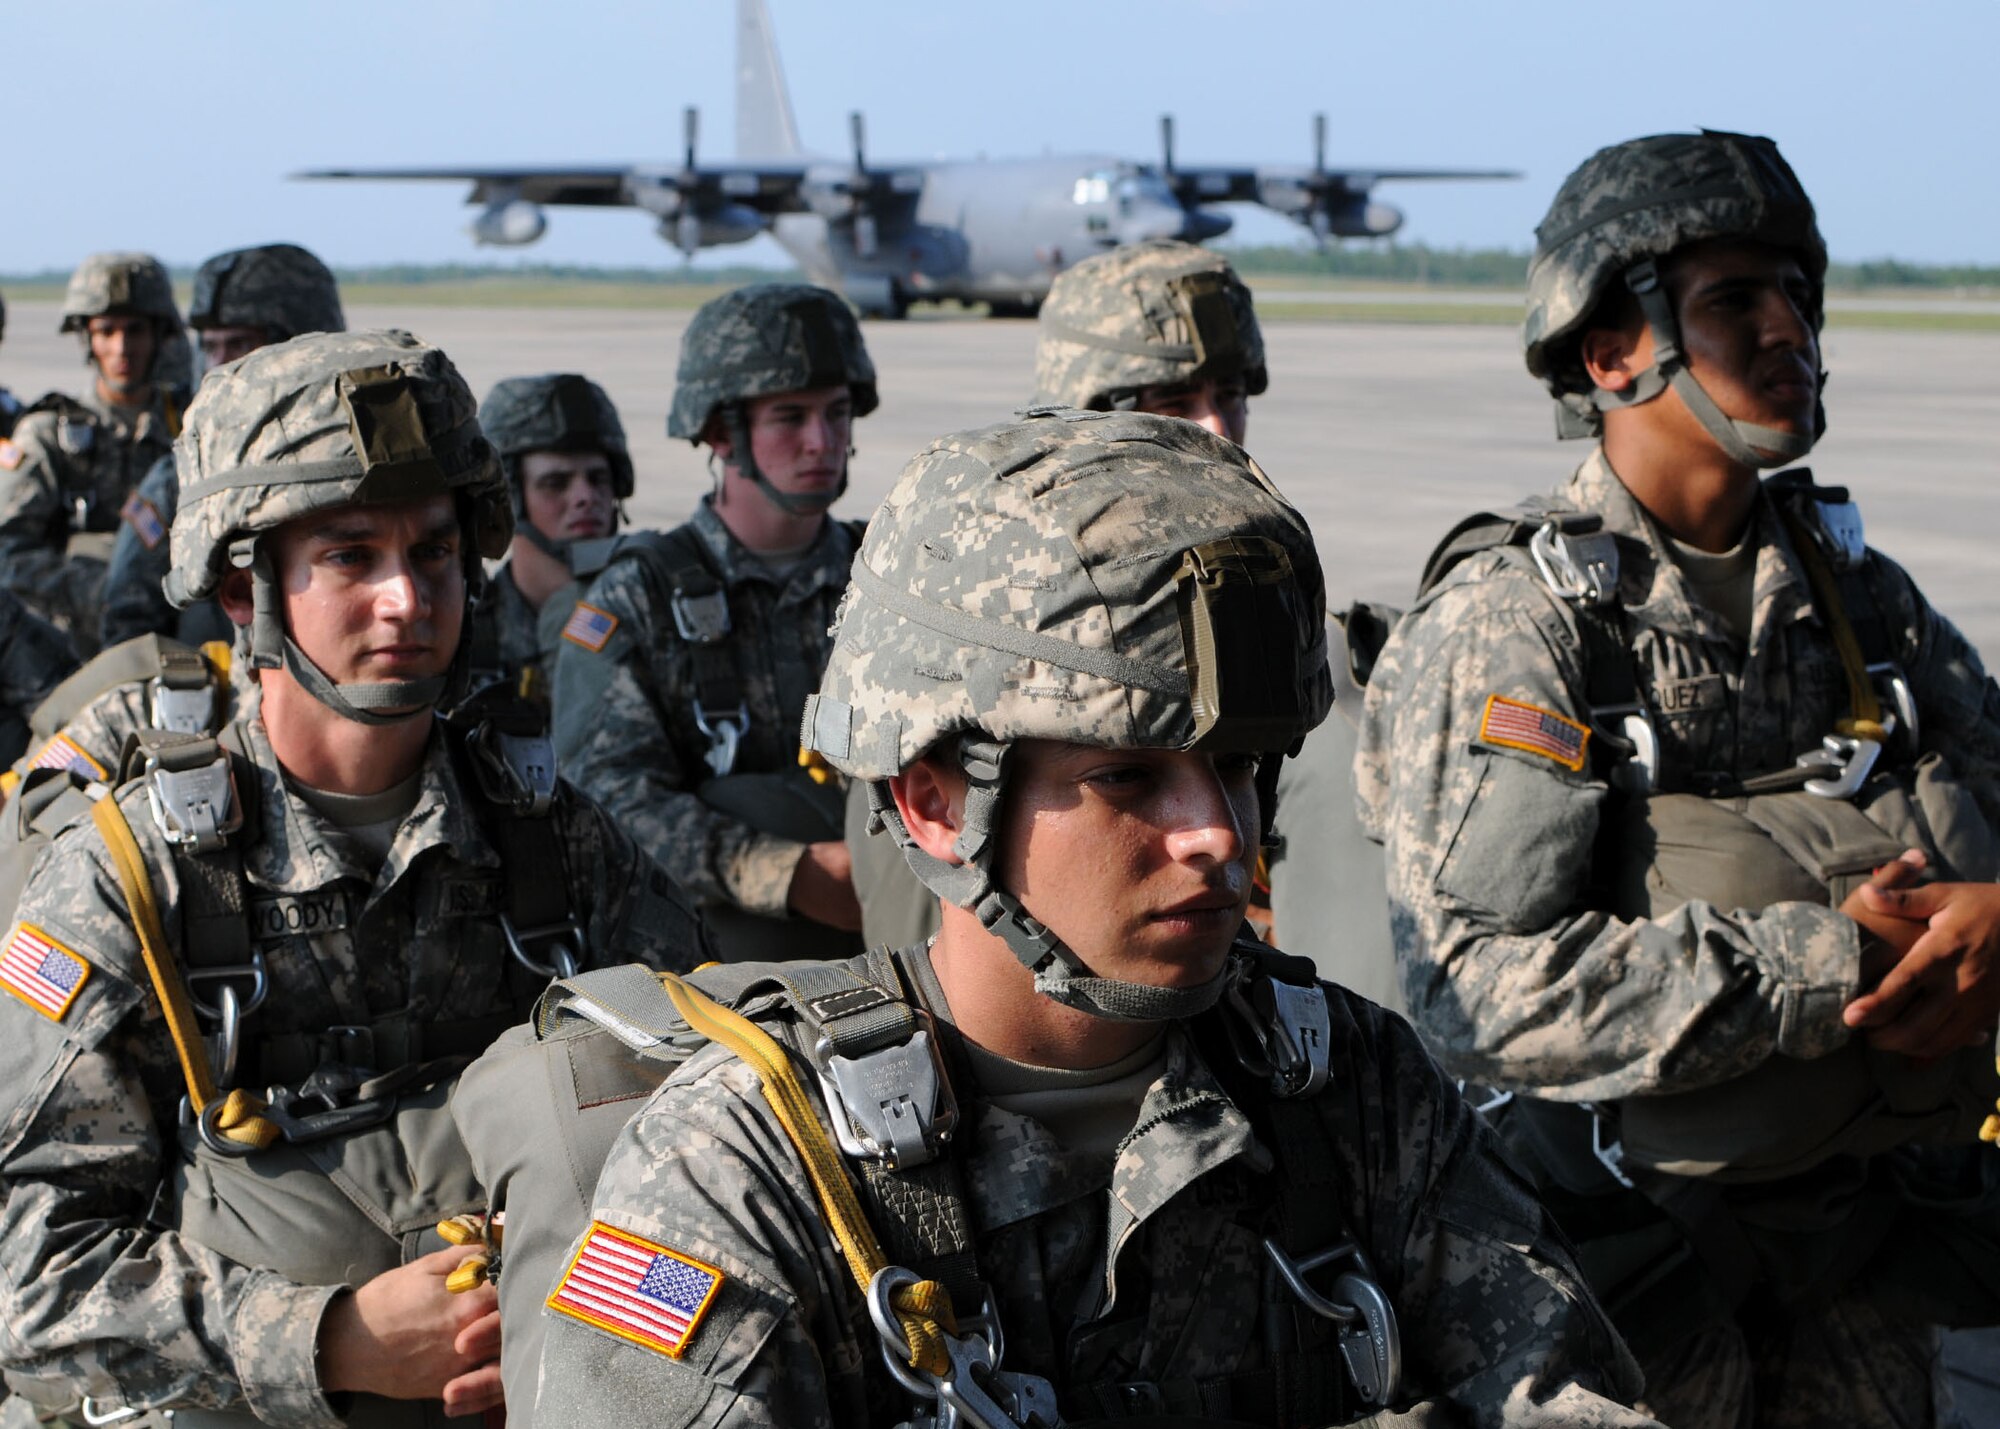 Army privates, students awaiting training at the U.S. Army Airborne School, wait to board the aircraft for a simulated jump on the flightline at Duke Field, Fla., June 14. The production company, WILL Interactive, started work on a choose-your-own-adventure film for Department of Defense jumpmaster training at Fort Benning, Ga., with help from members from the U.S. Army Airborne School. However, when the crew needed a C-130 in portions of the video, the 919th Special Operations Wing offered to support the project at Duke Field June 13-15. (U.S. Air Force photo/Tech. Sgt. Cheryl Foster)